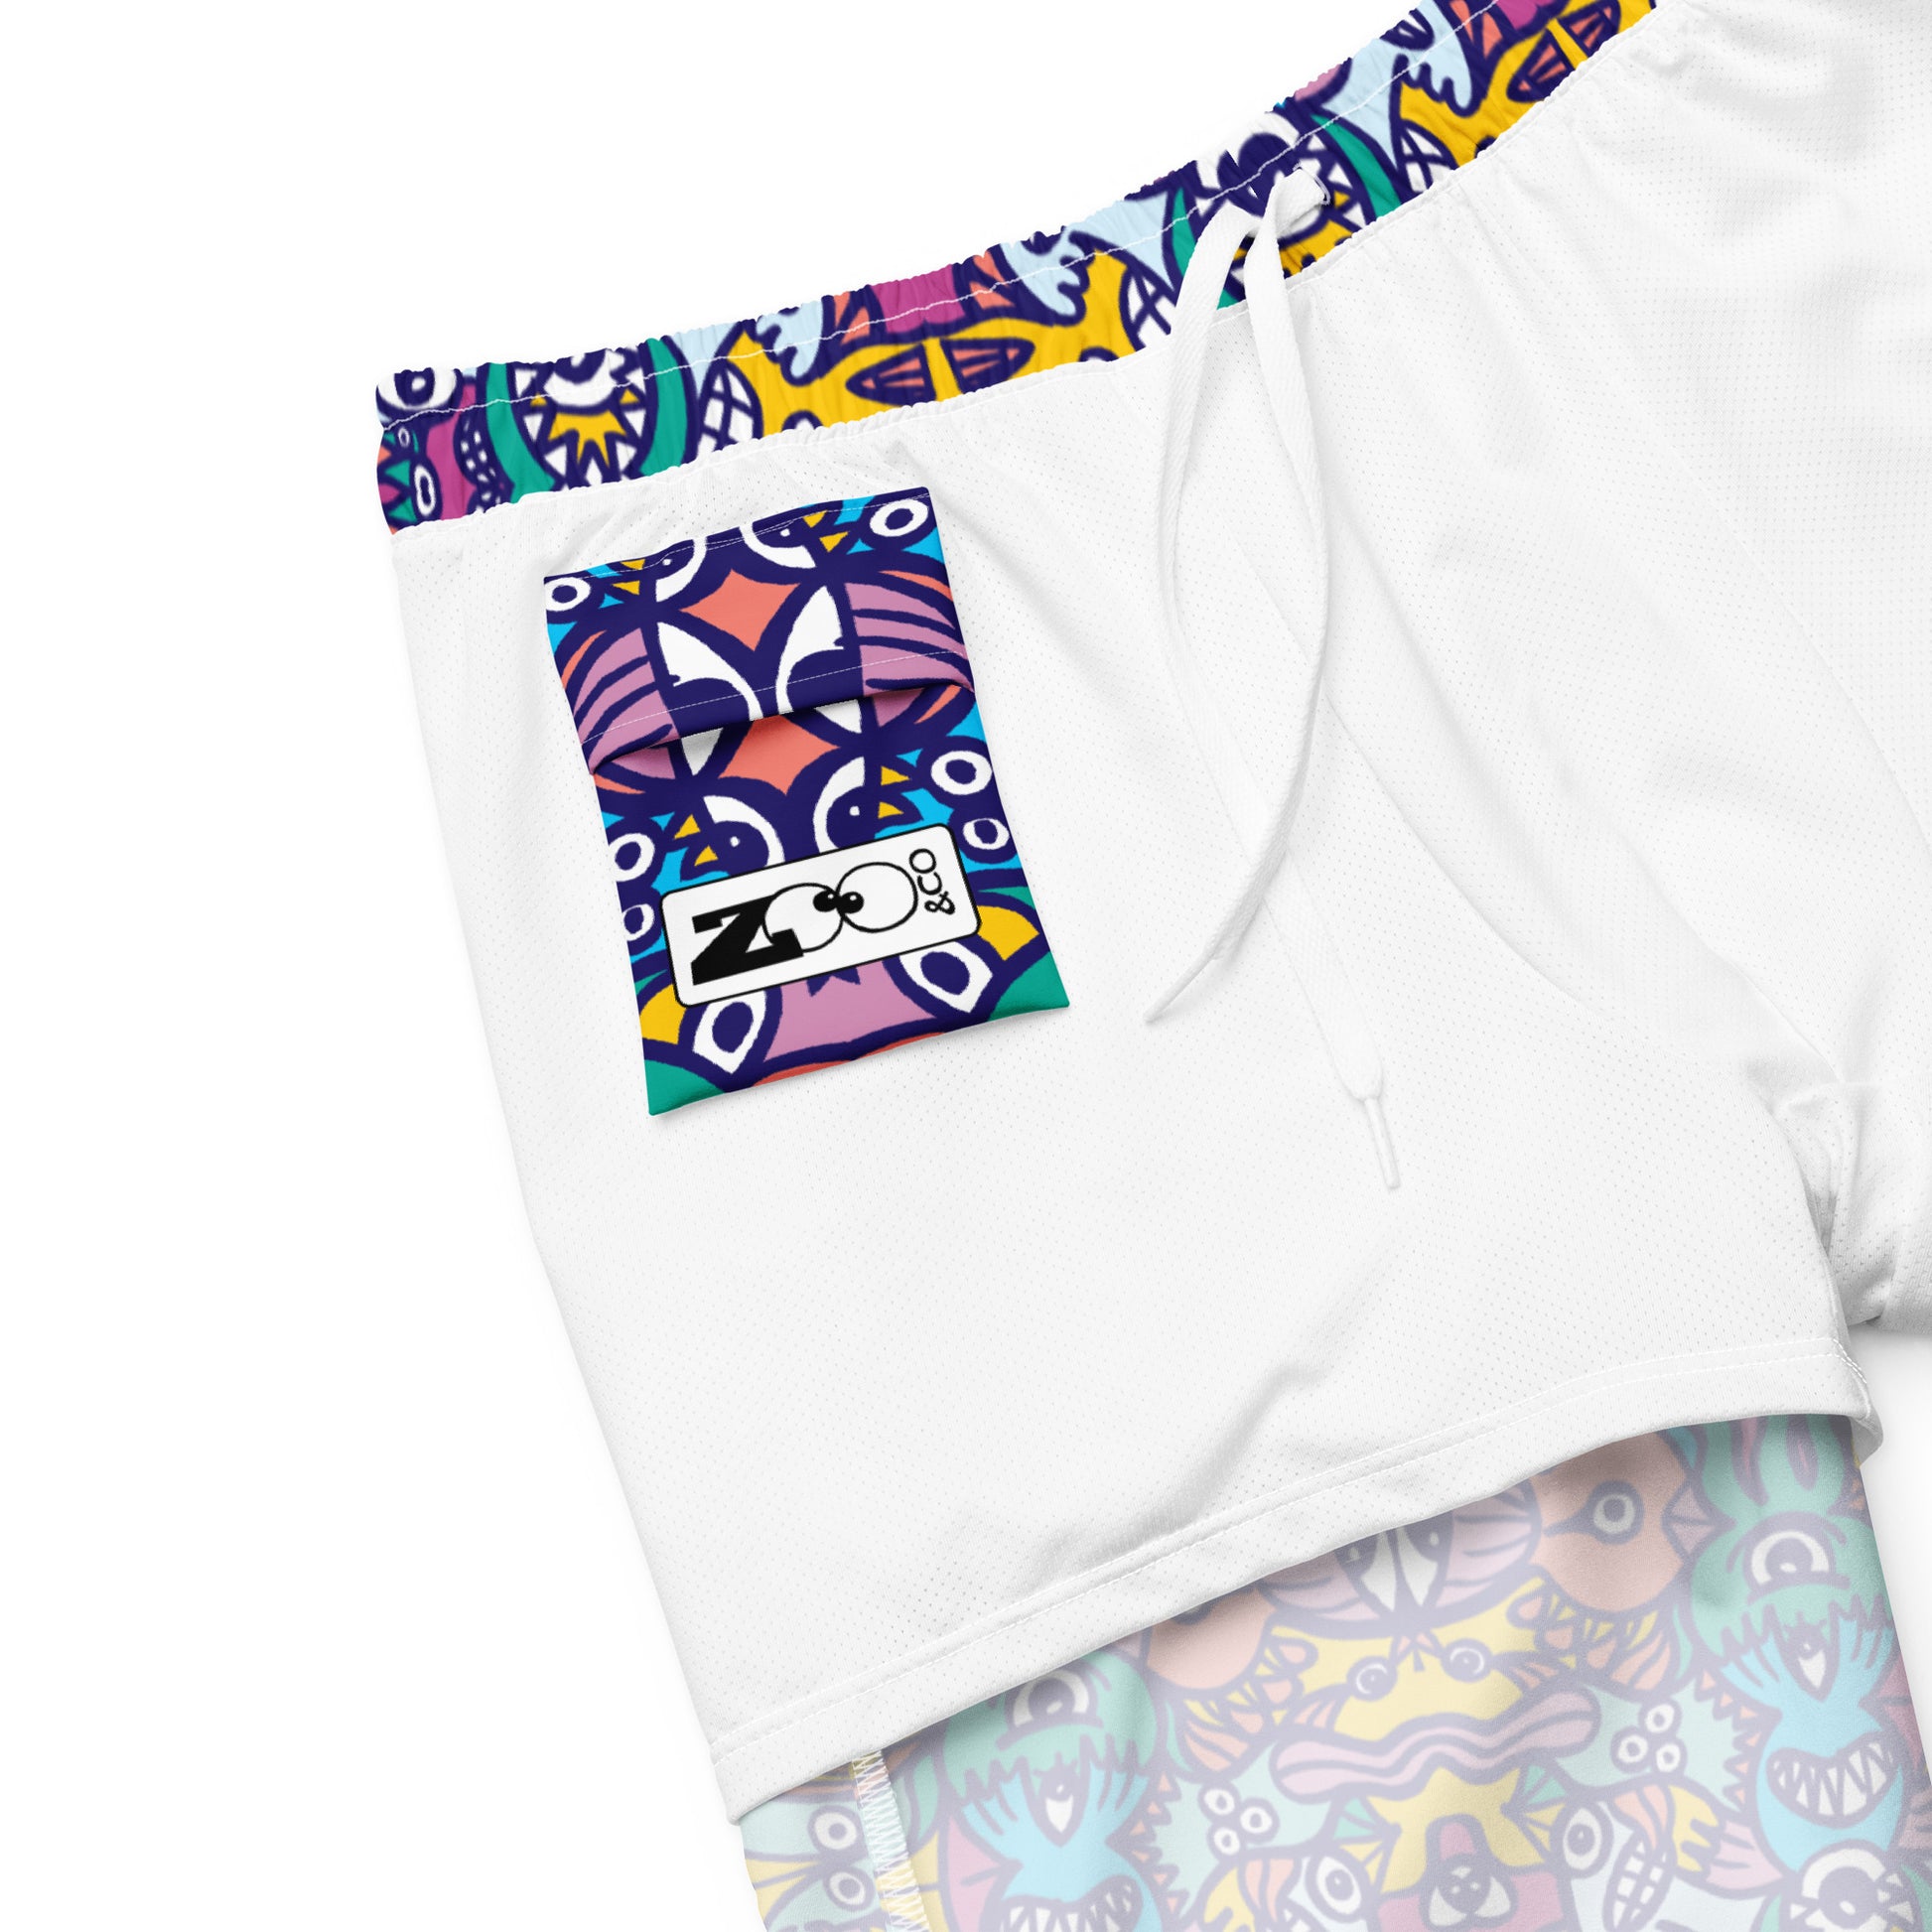 Whimsical design featuring multicolor critters from another world Men's swim trunks. Product details. Interior pocket